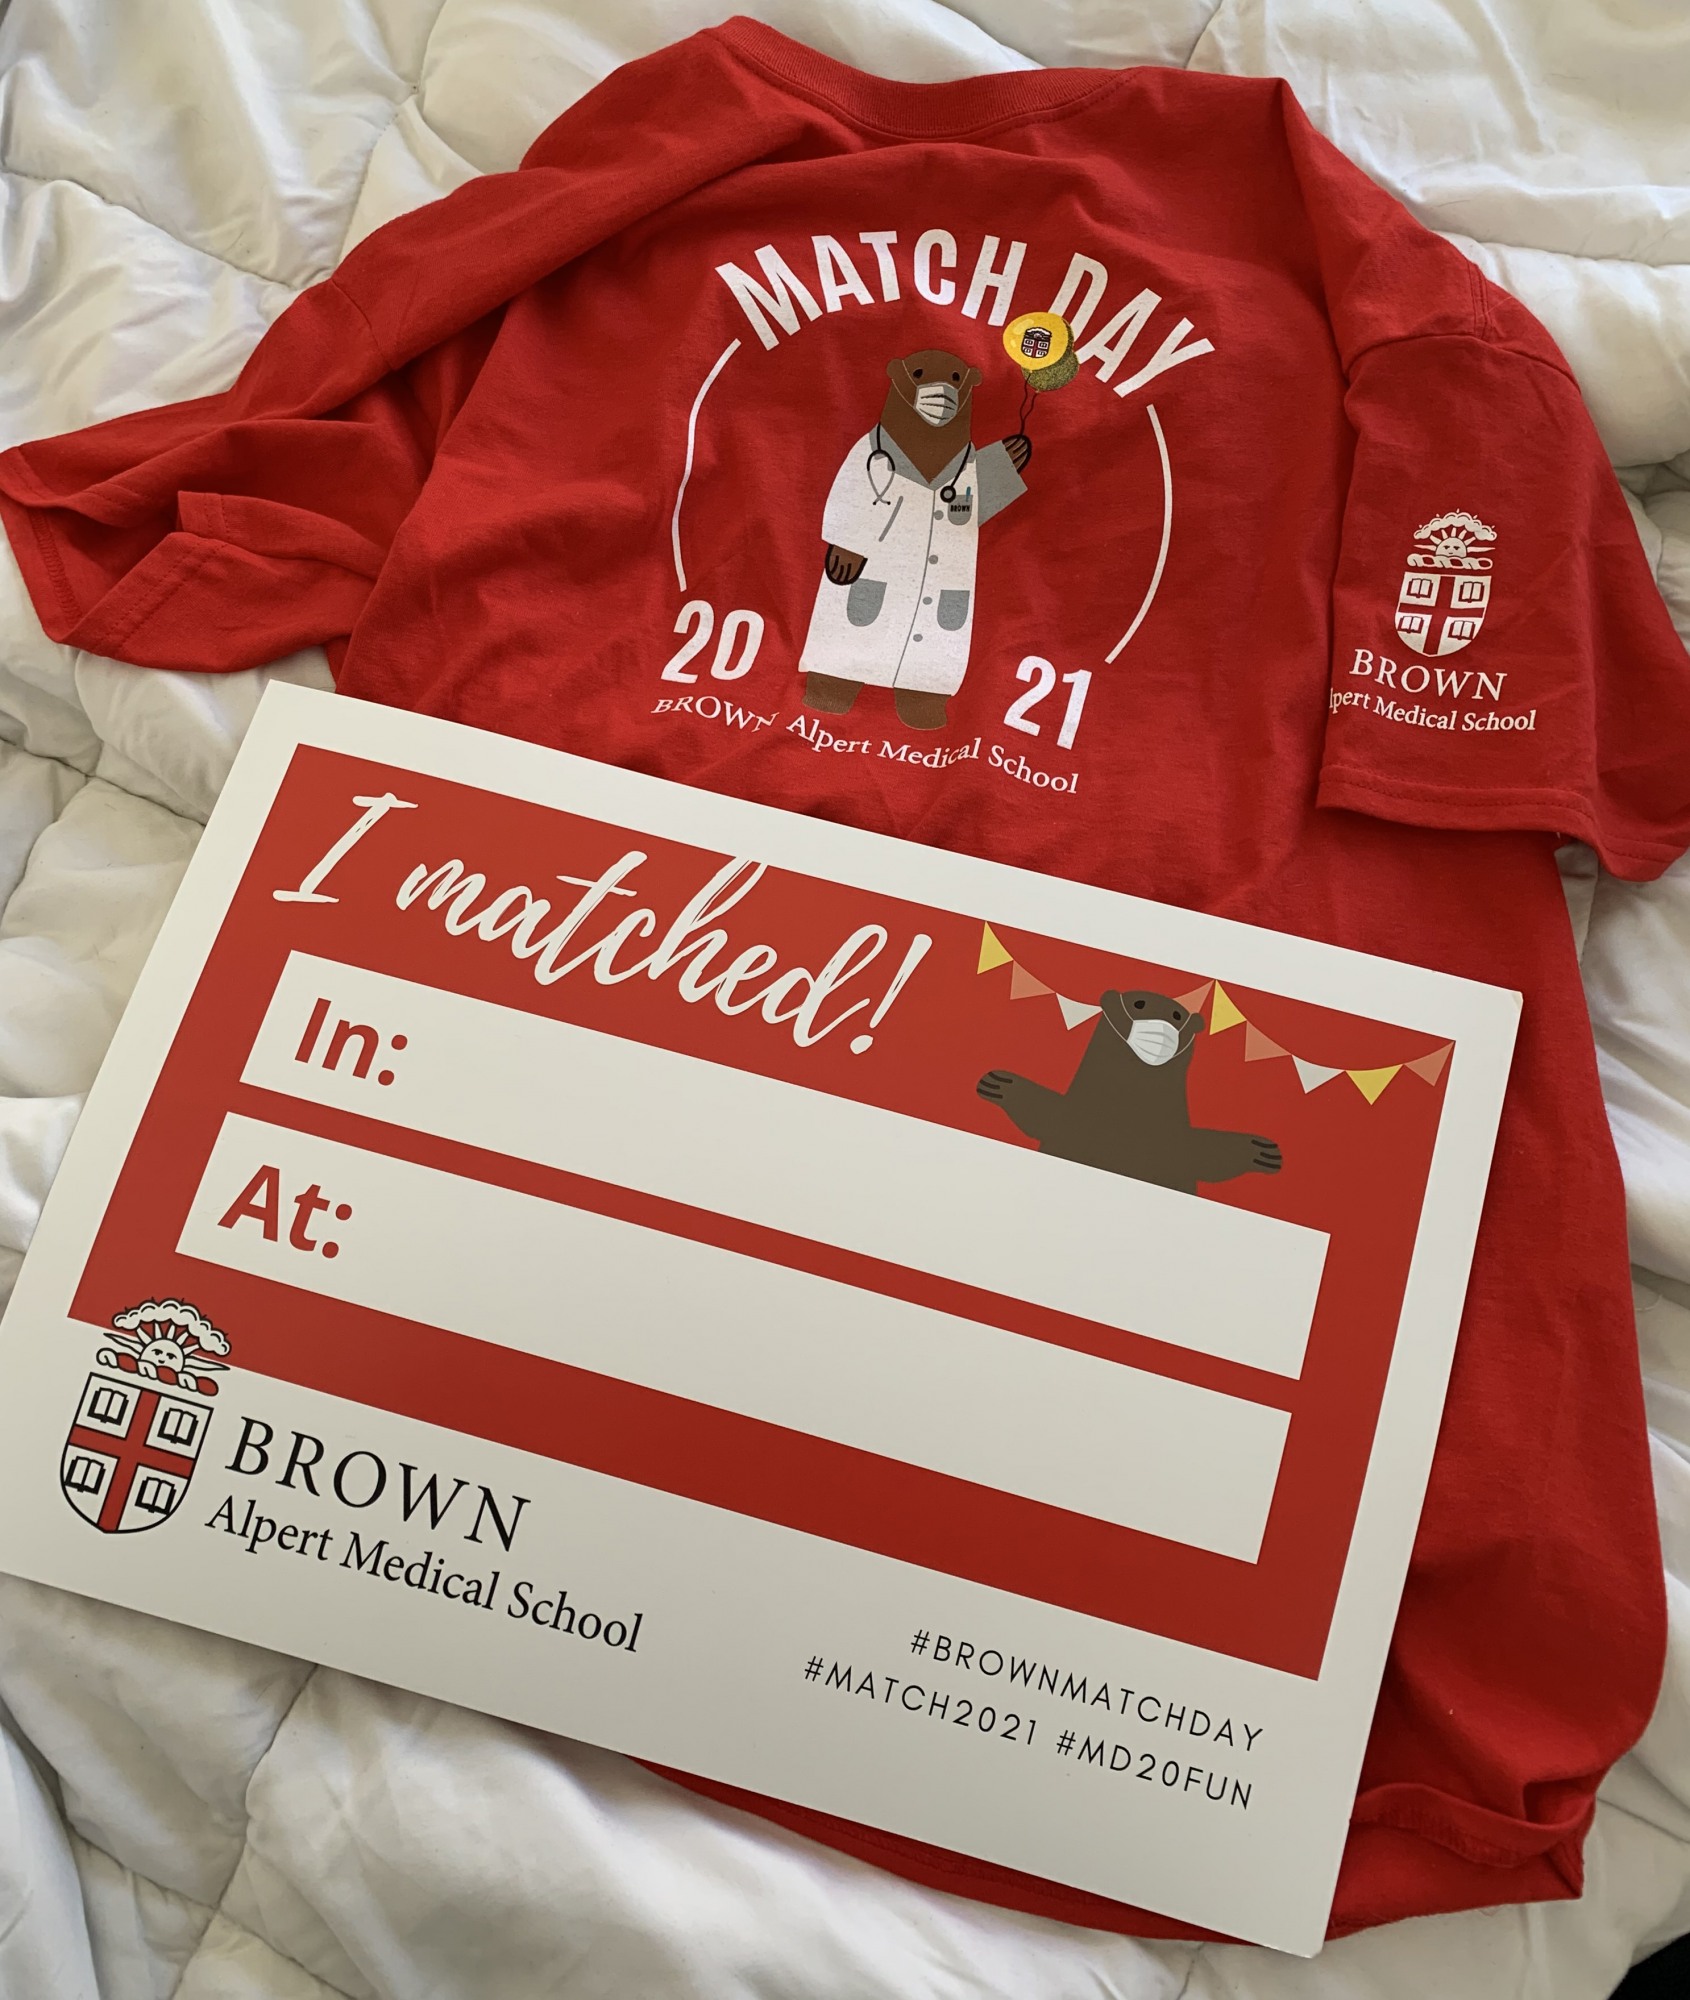 Match Day shirt and sign